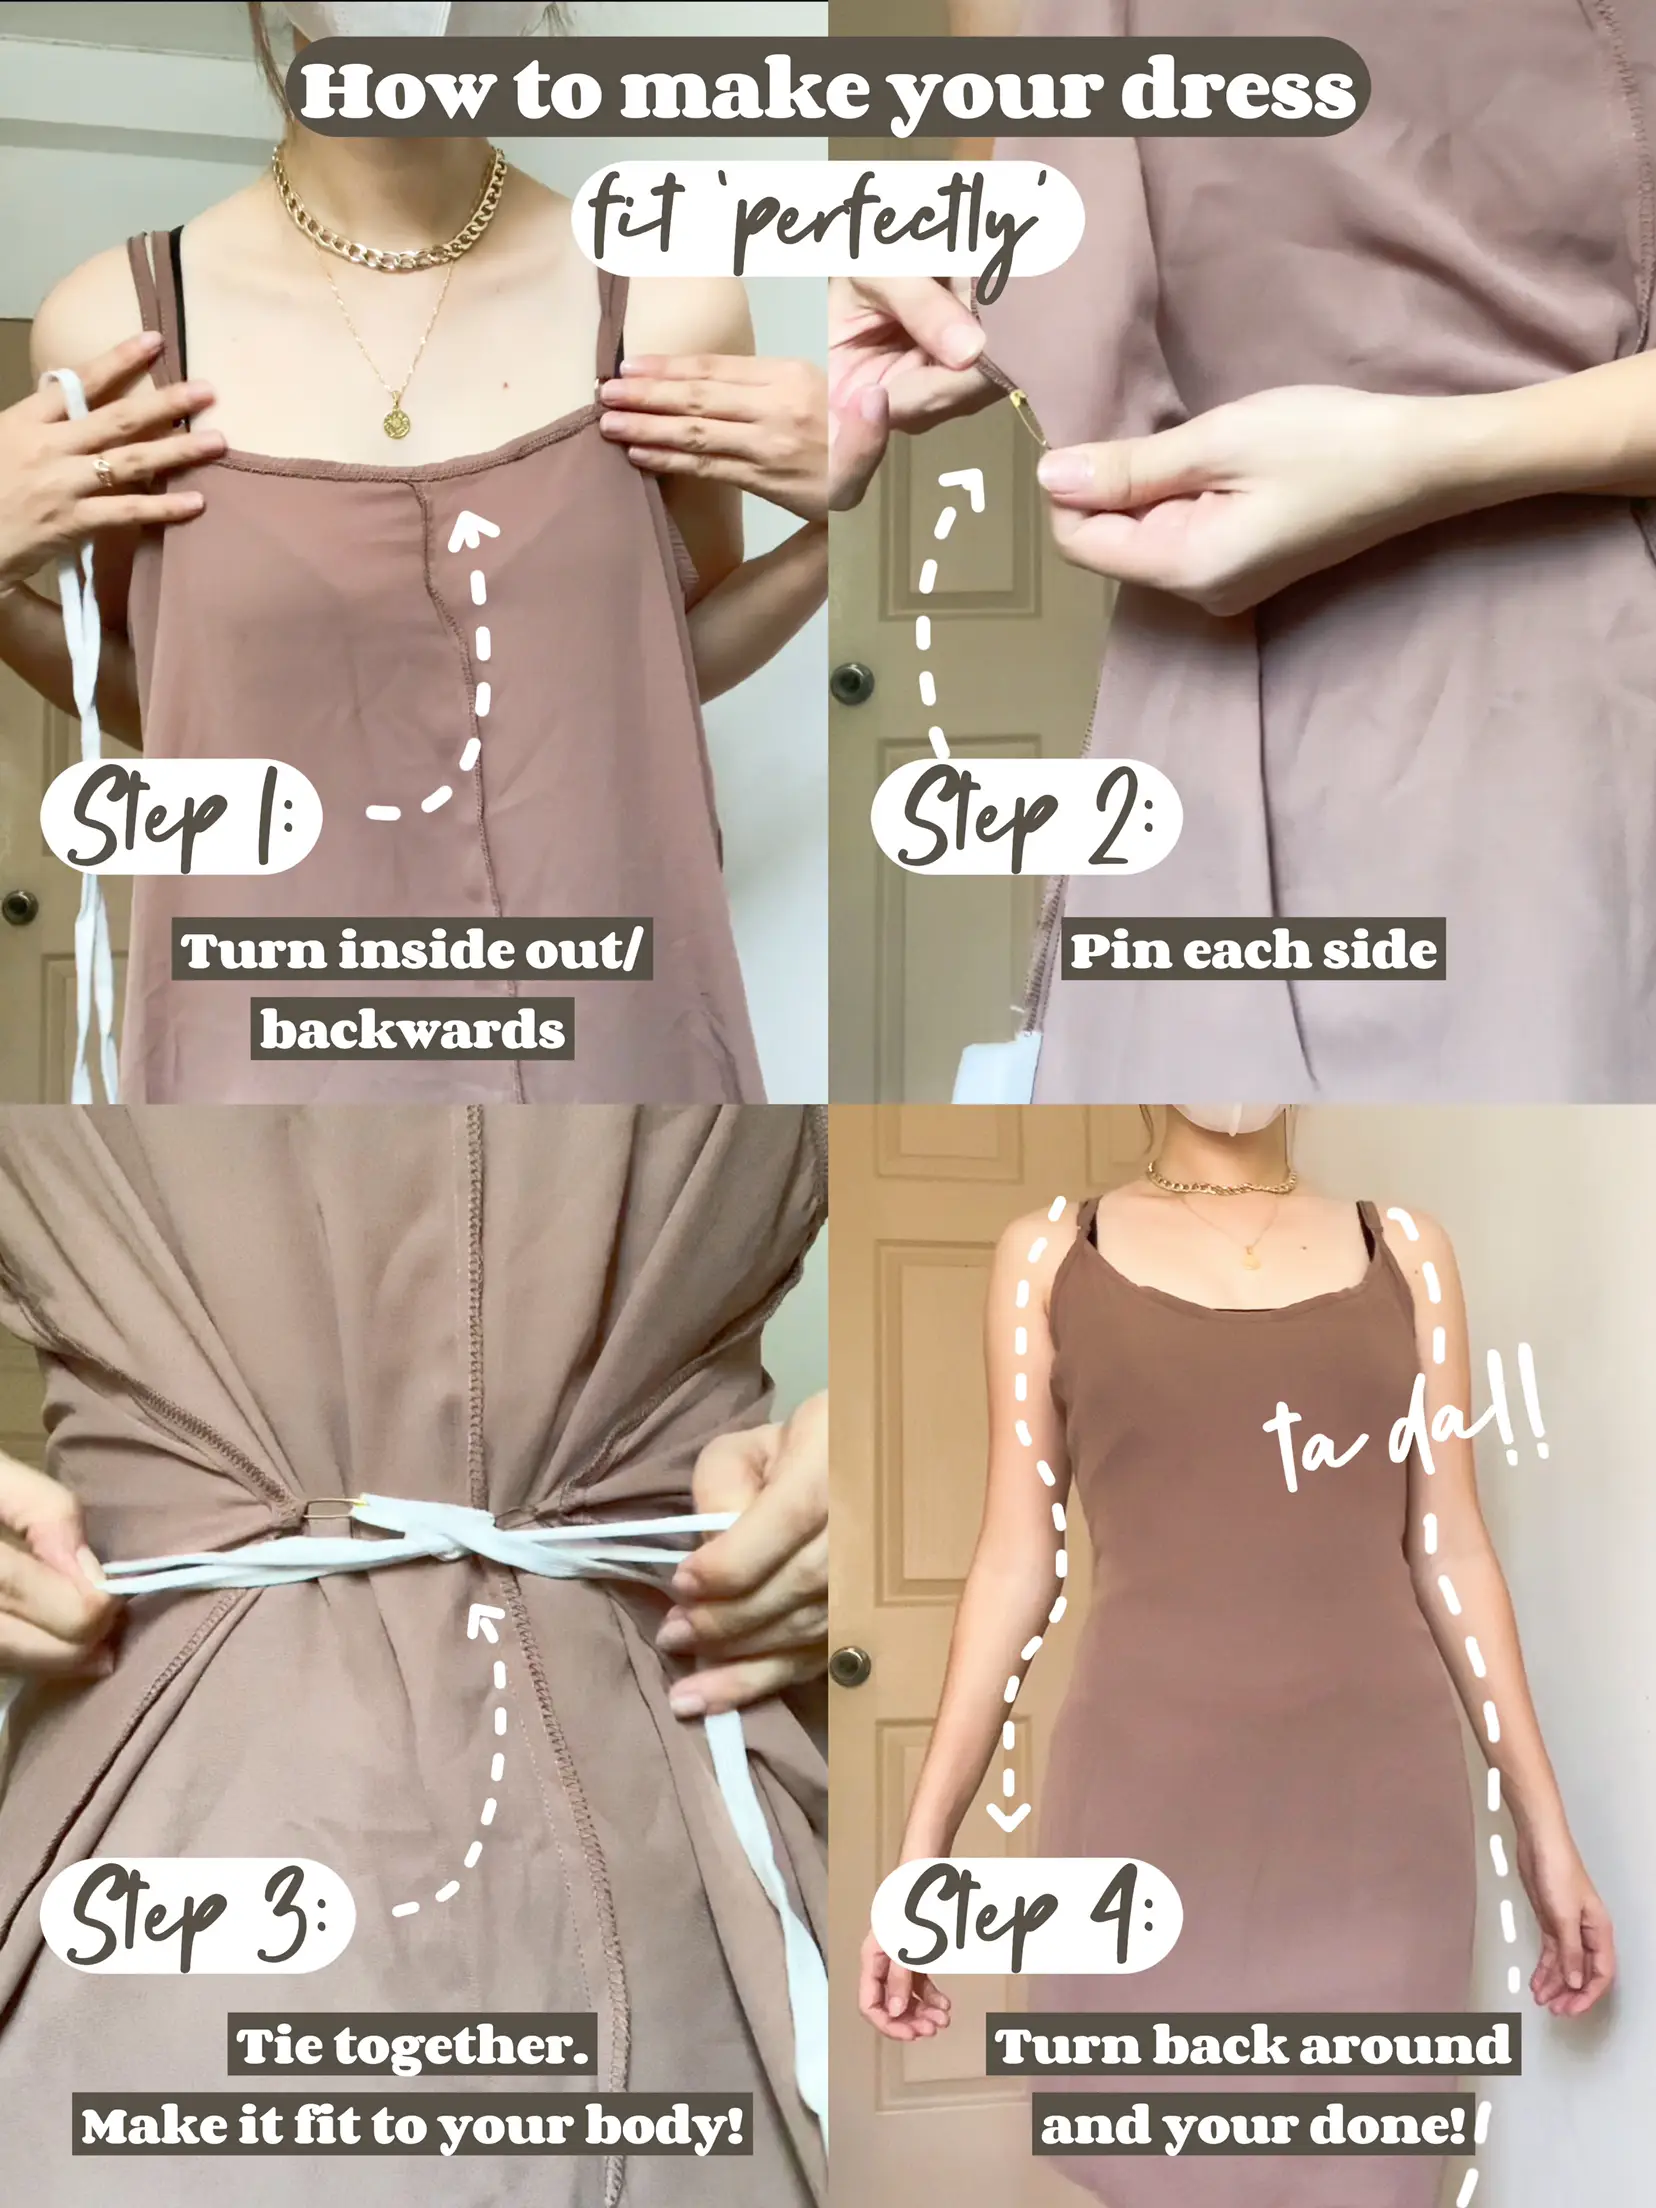 BRA HACKS FOR BACKLESS TOP/DRESS WITHOUT USING NIP, Video published by  christine_chato